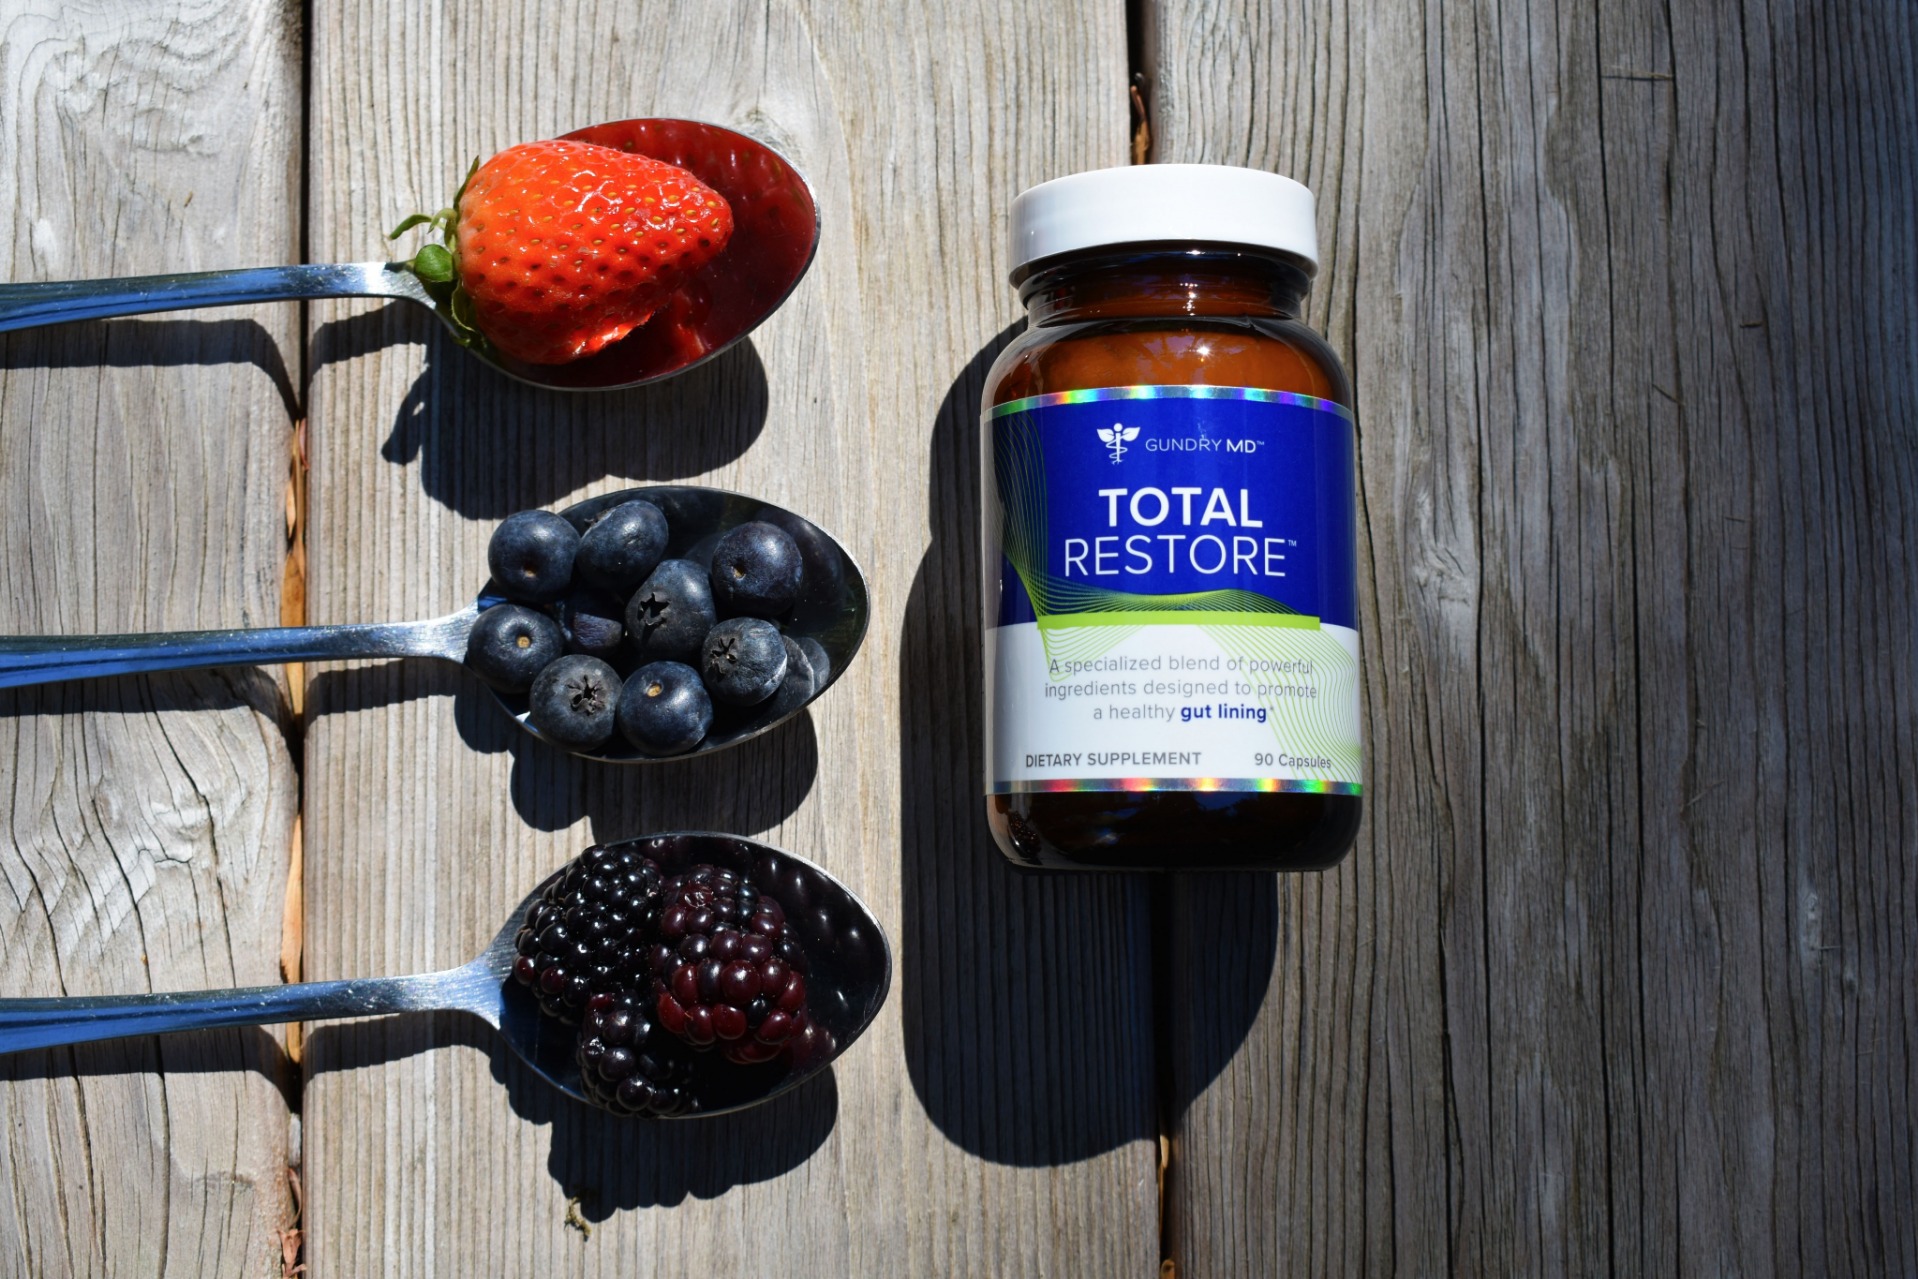 Container of Total Restore - 16 gut-boosting ingredients, it helps to naturally “patch up” the holes in your digestive system